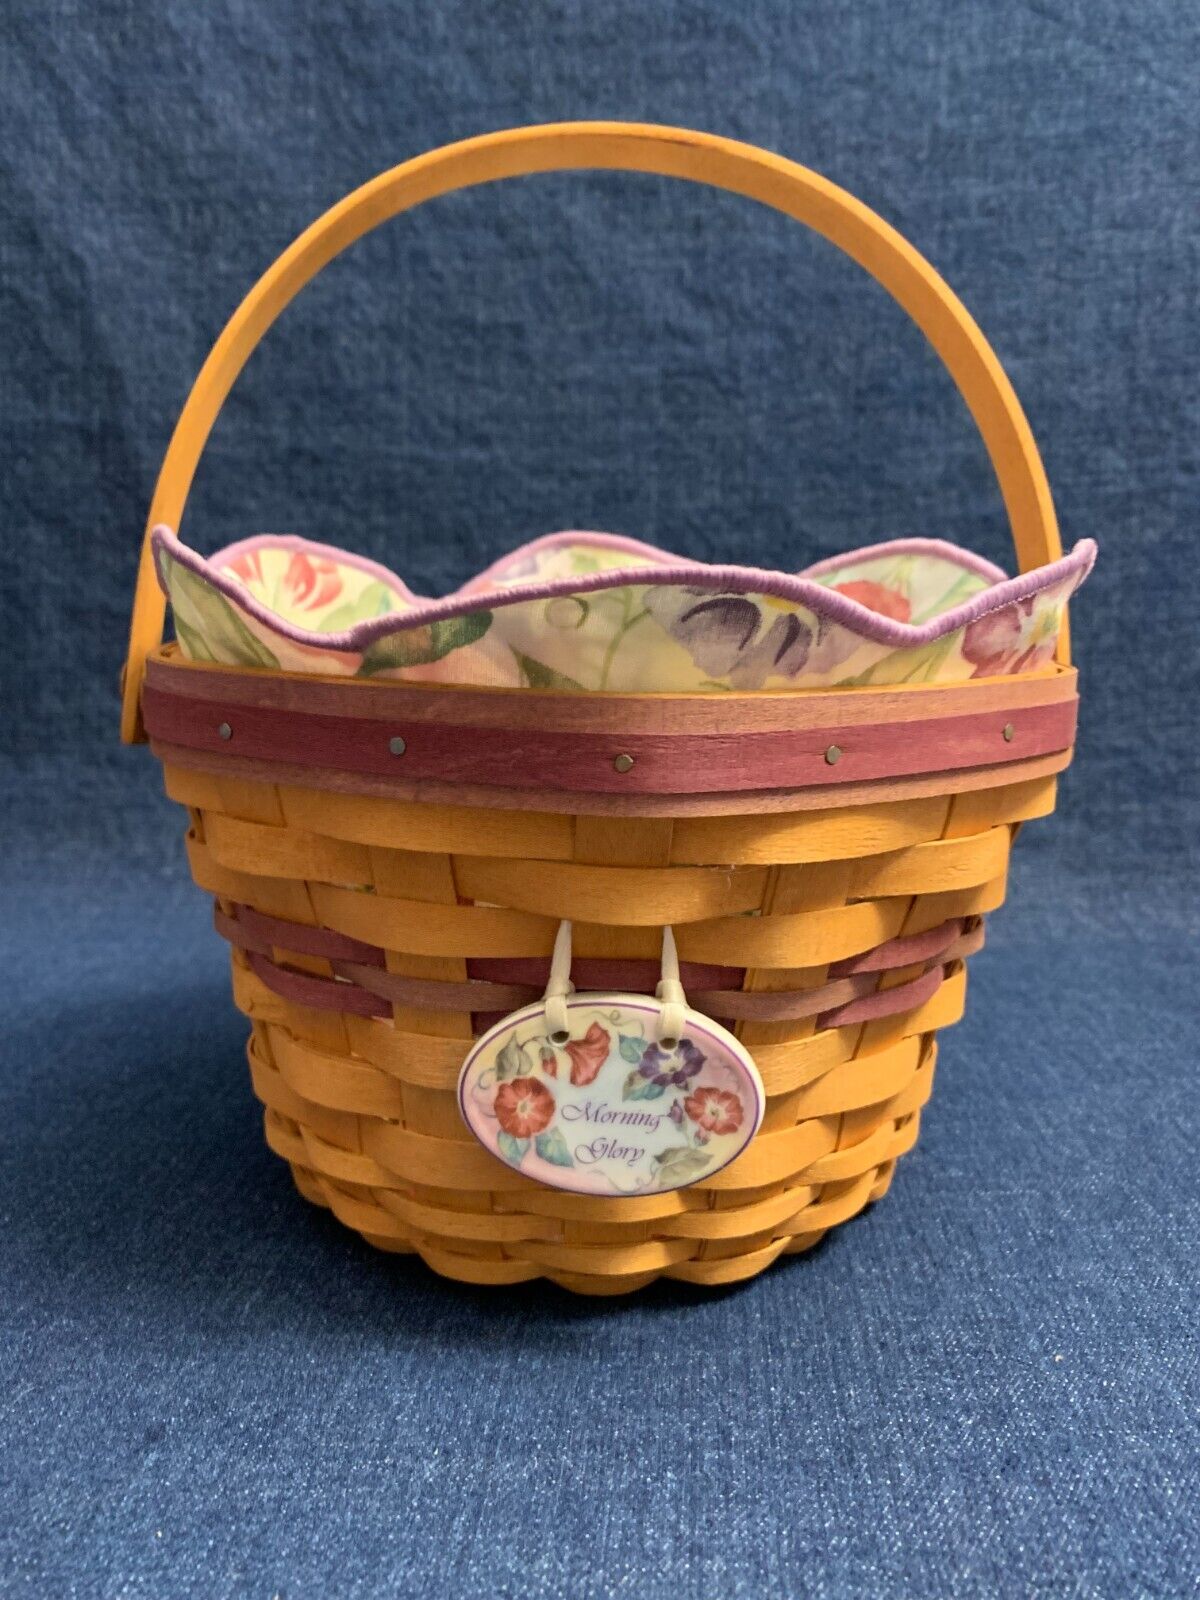 Longaberger 2000 May Series Morning Glory Basket W/Protector, Liner &Tie On MINT